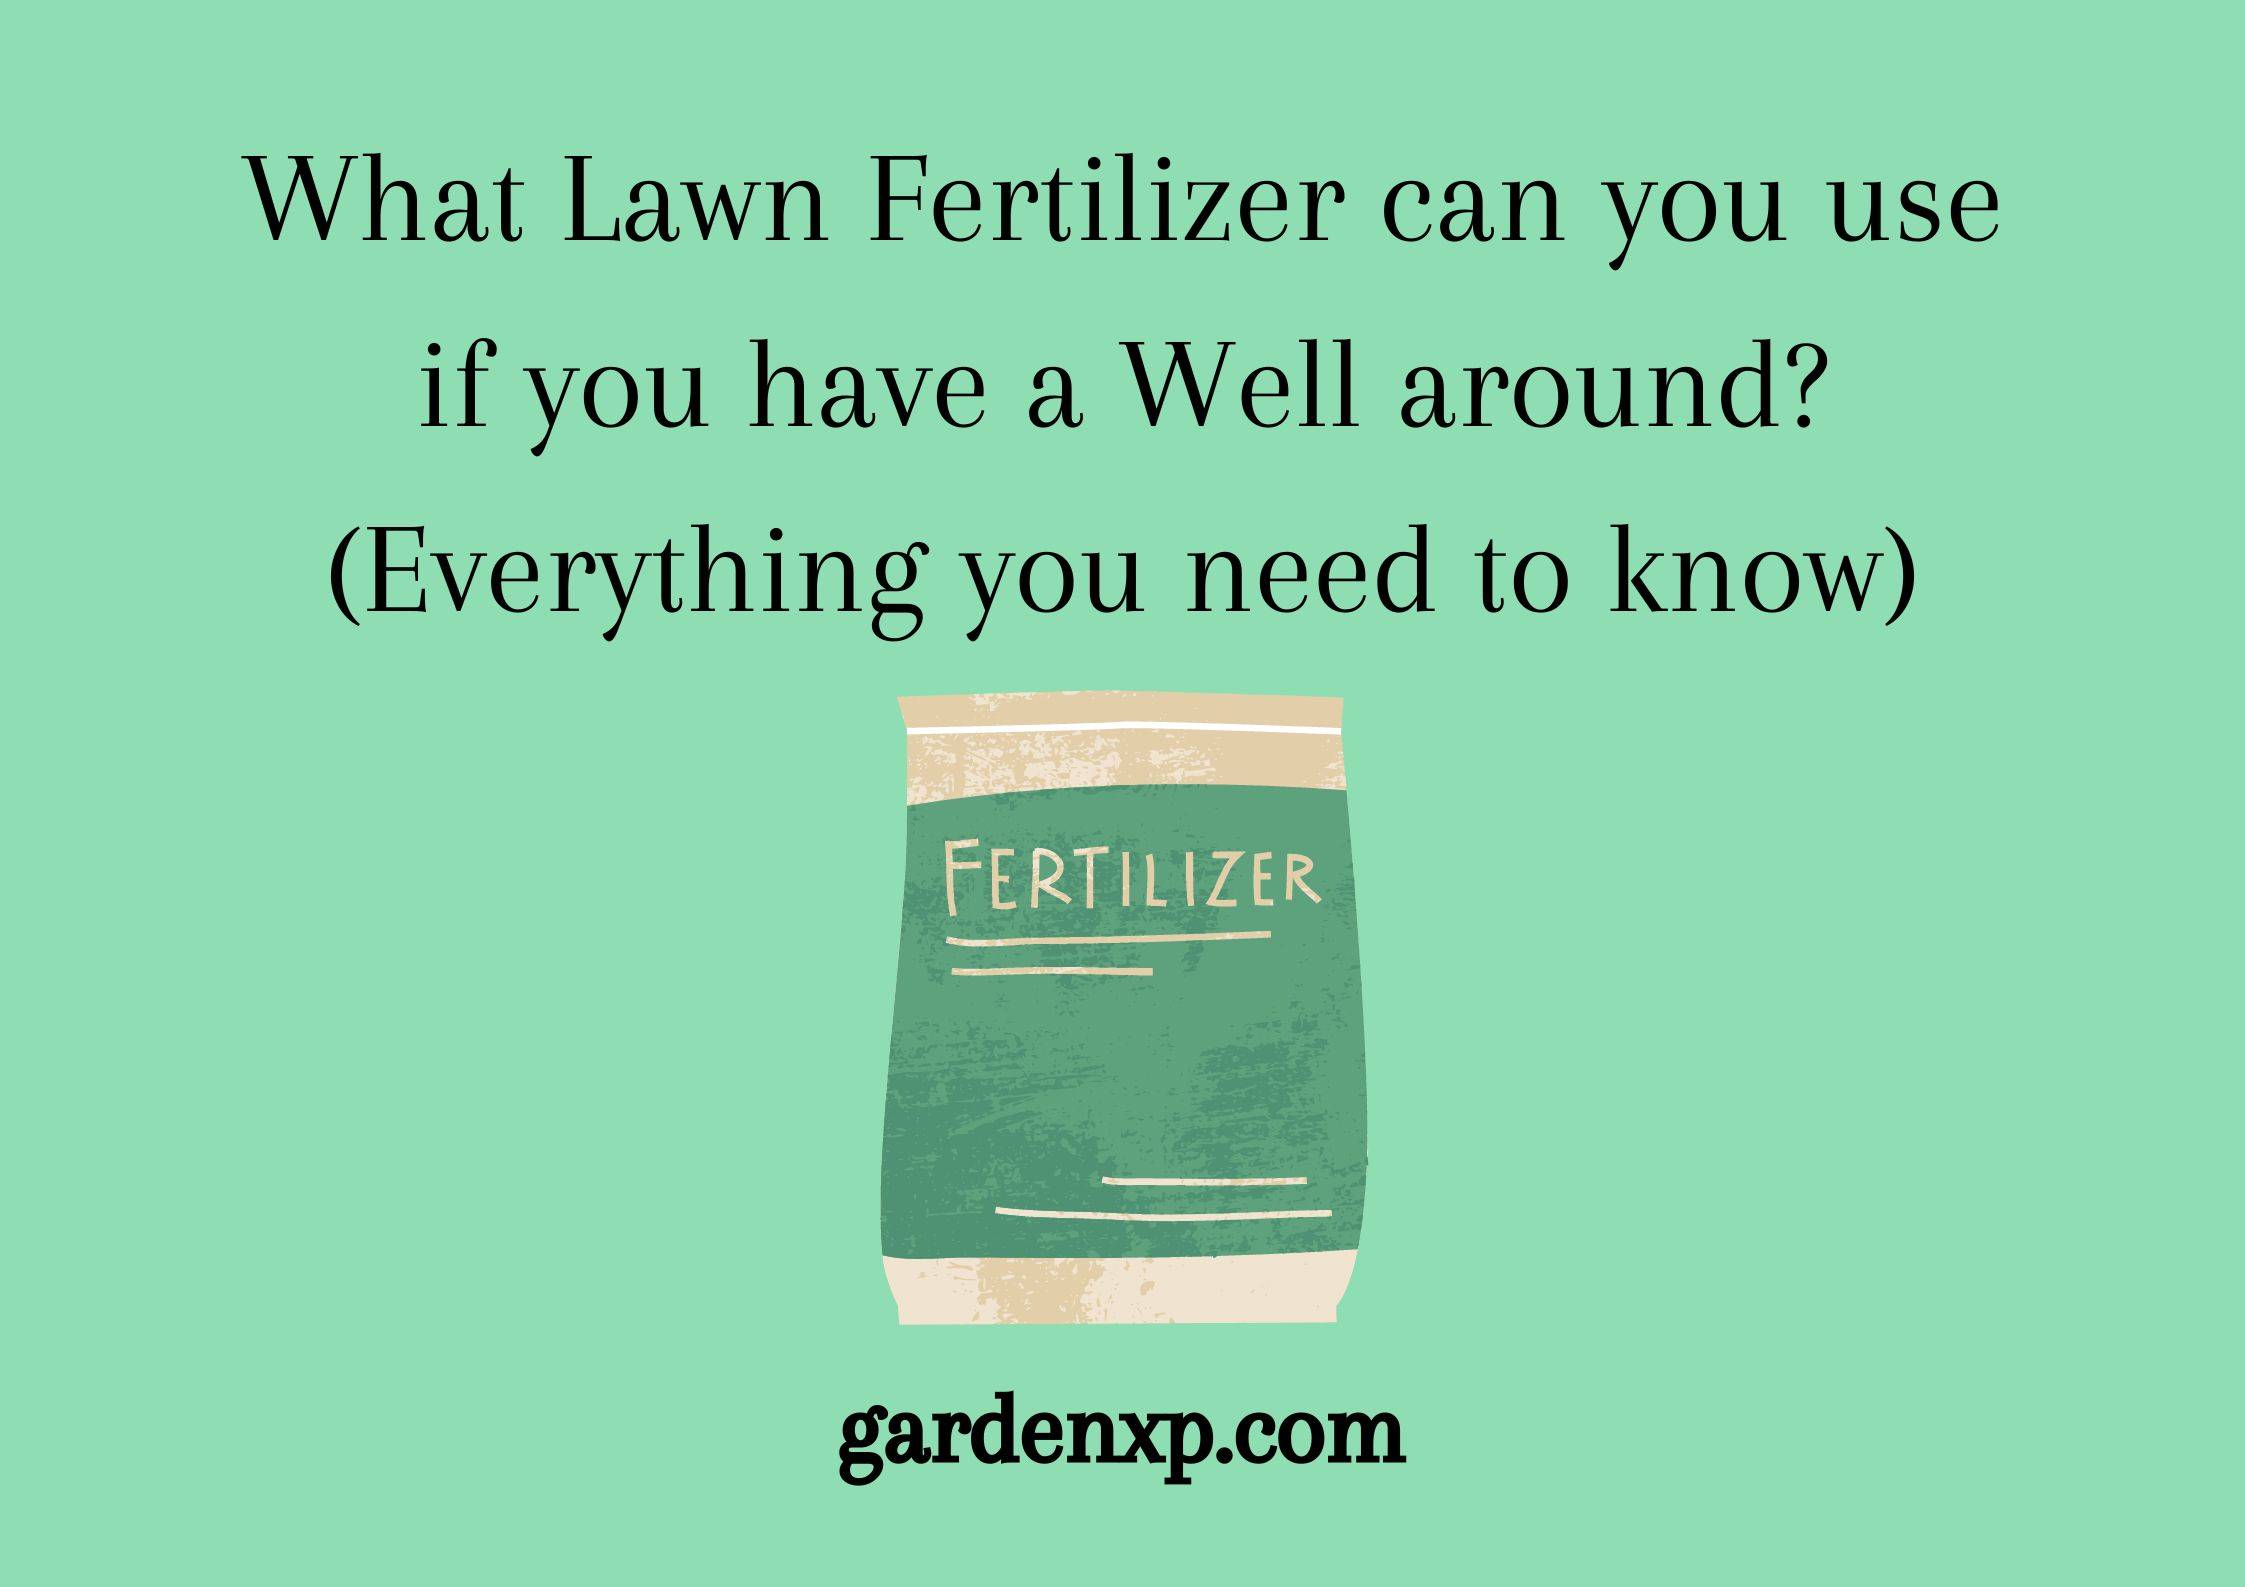 What Lawn Fertilizer can you use if you have a Well around? (Everything you need to know)